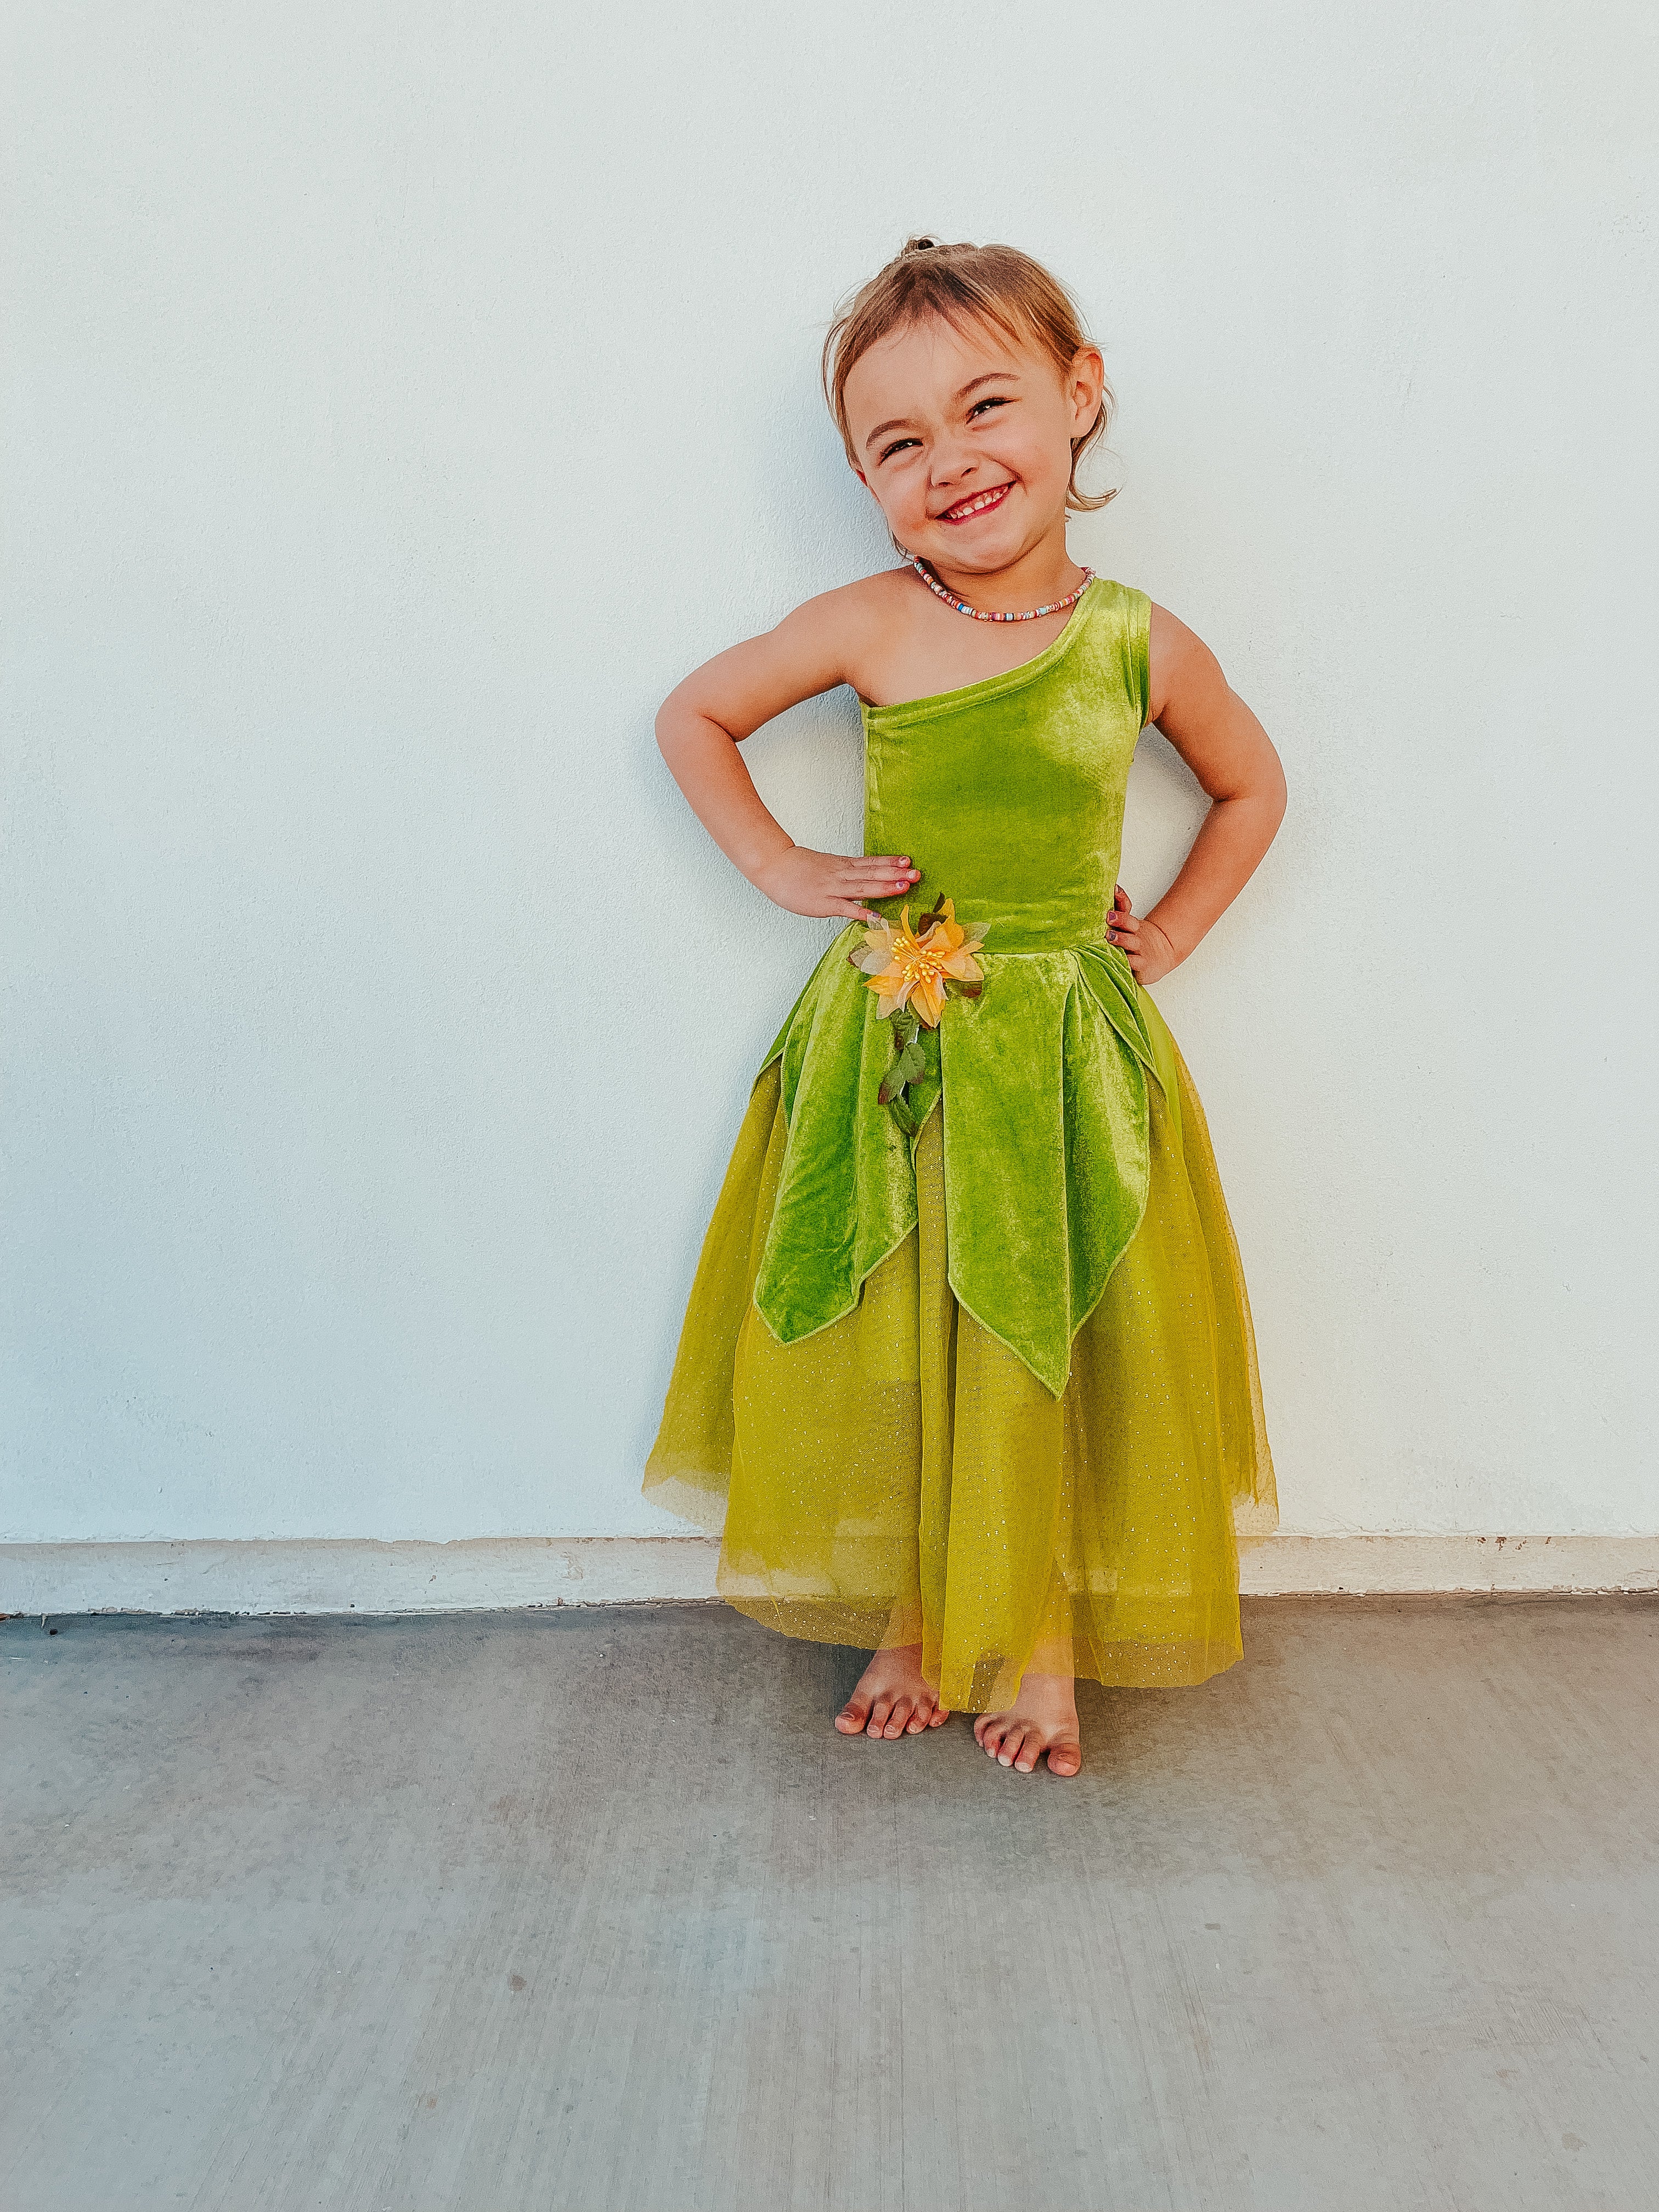 Costume Ideas for Women: How to Dress Up as Princess Tiana (Disney's  Princess and the Frog)